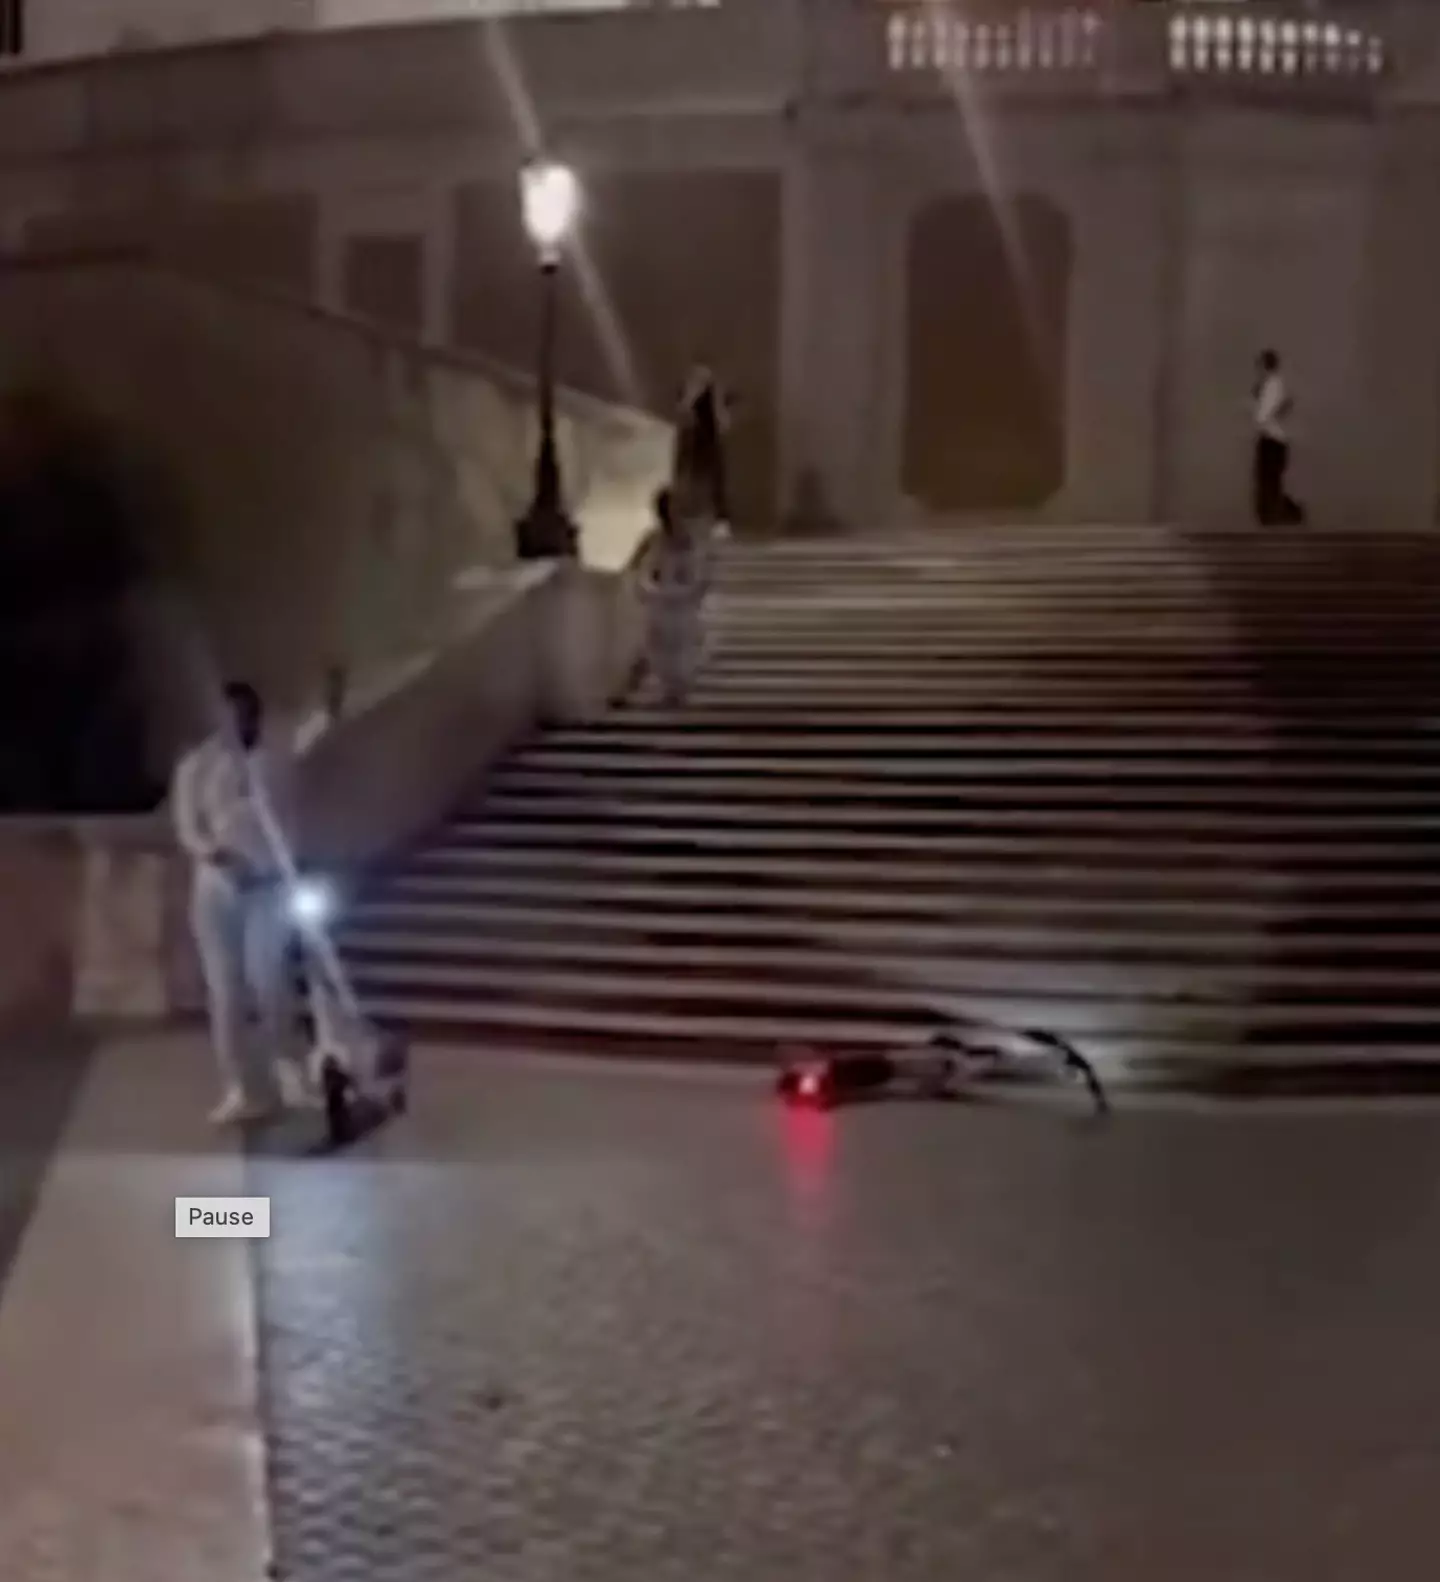 The fallen scooter caused £21,000 worth of damage to the historical steps.